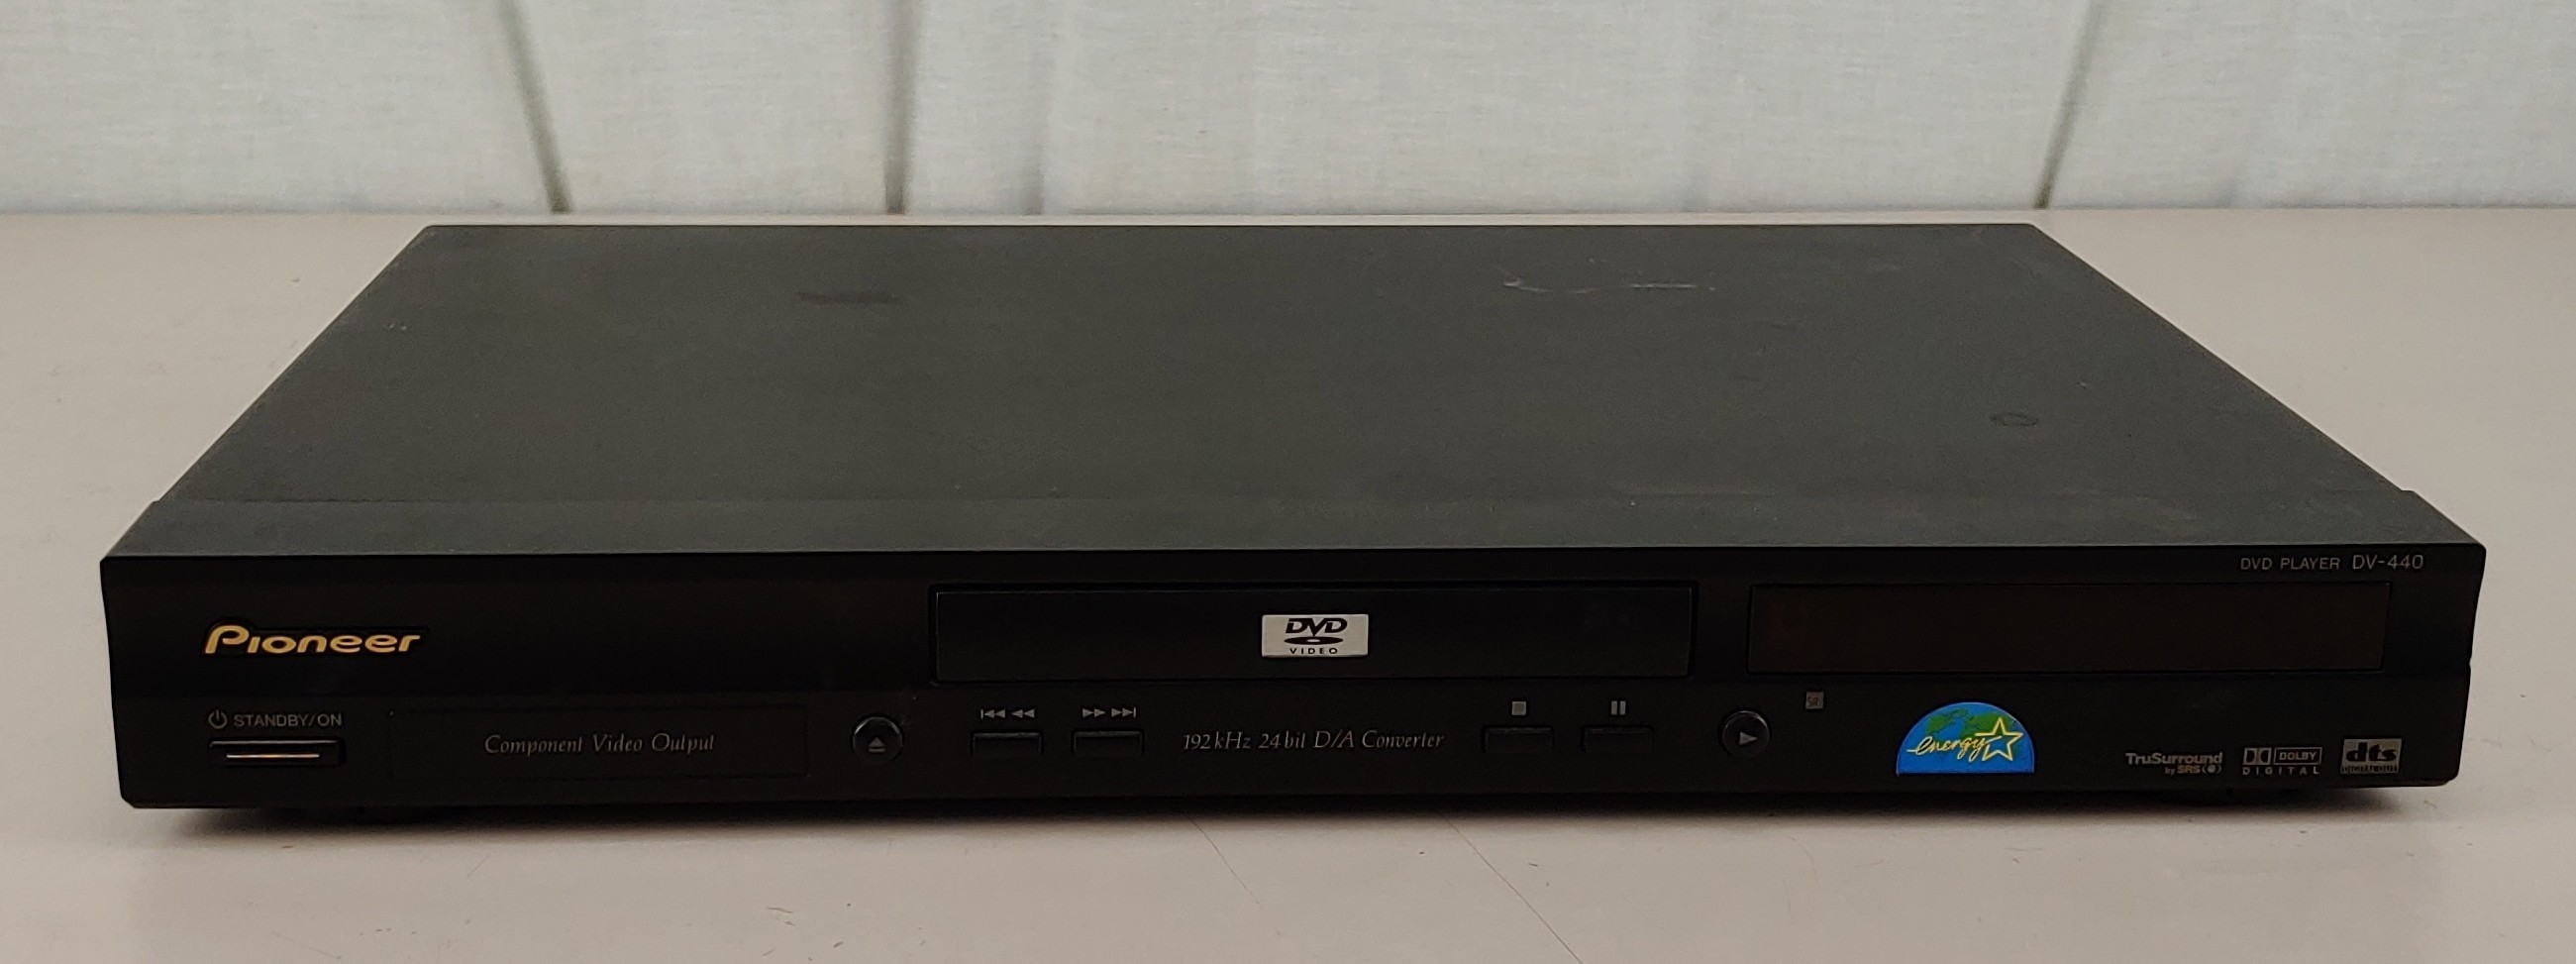 Pioneer DV 440 DVD and CD Player